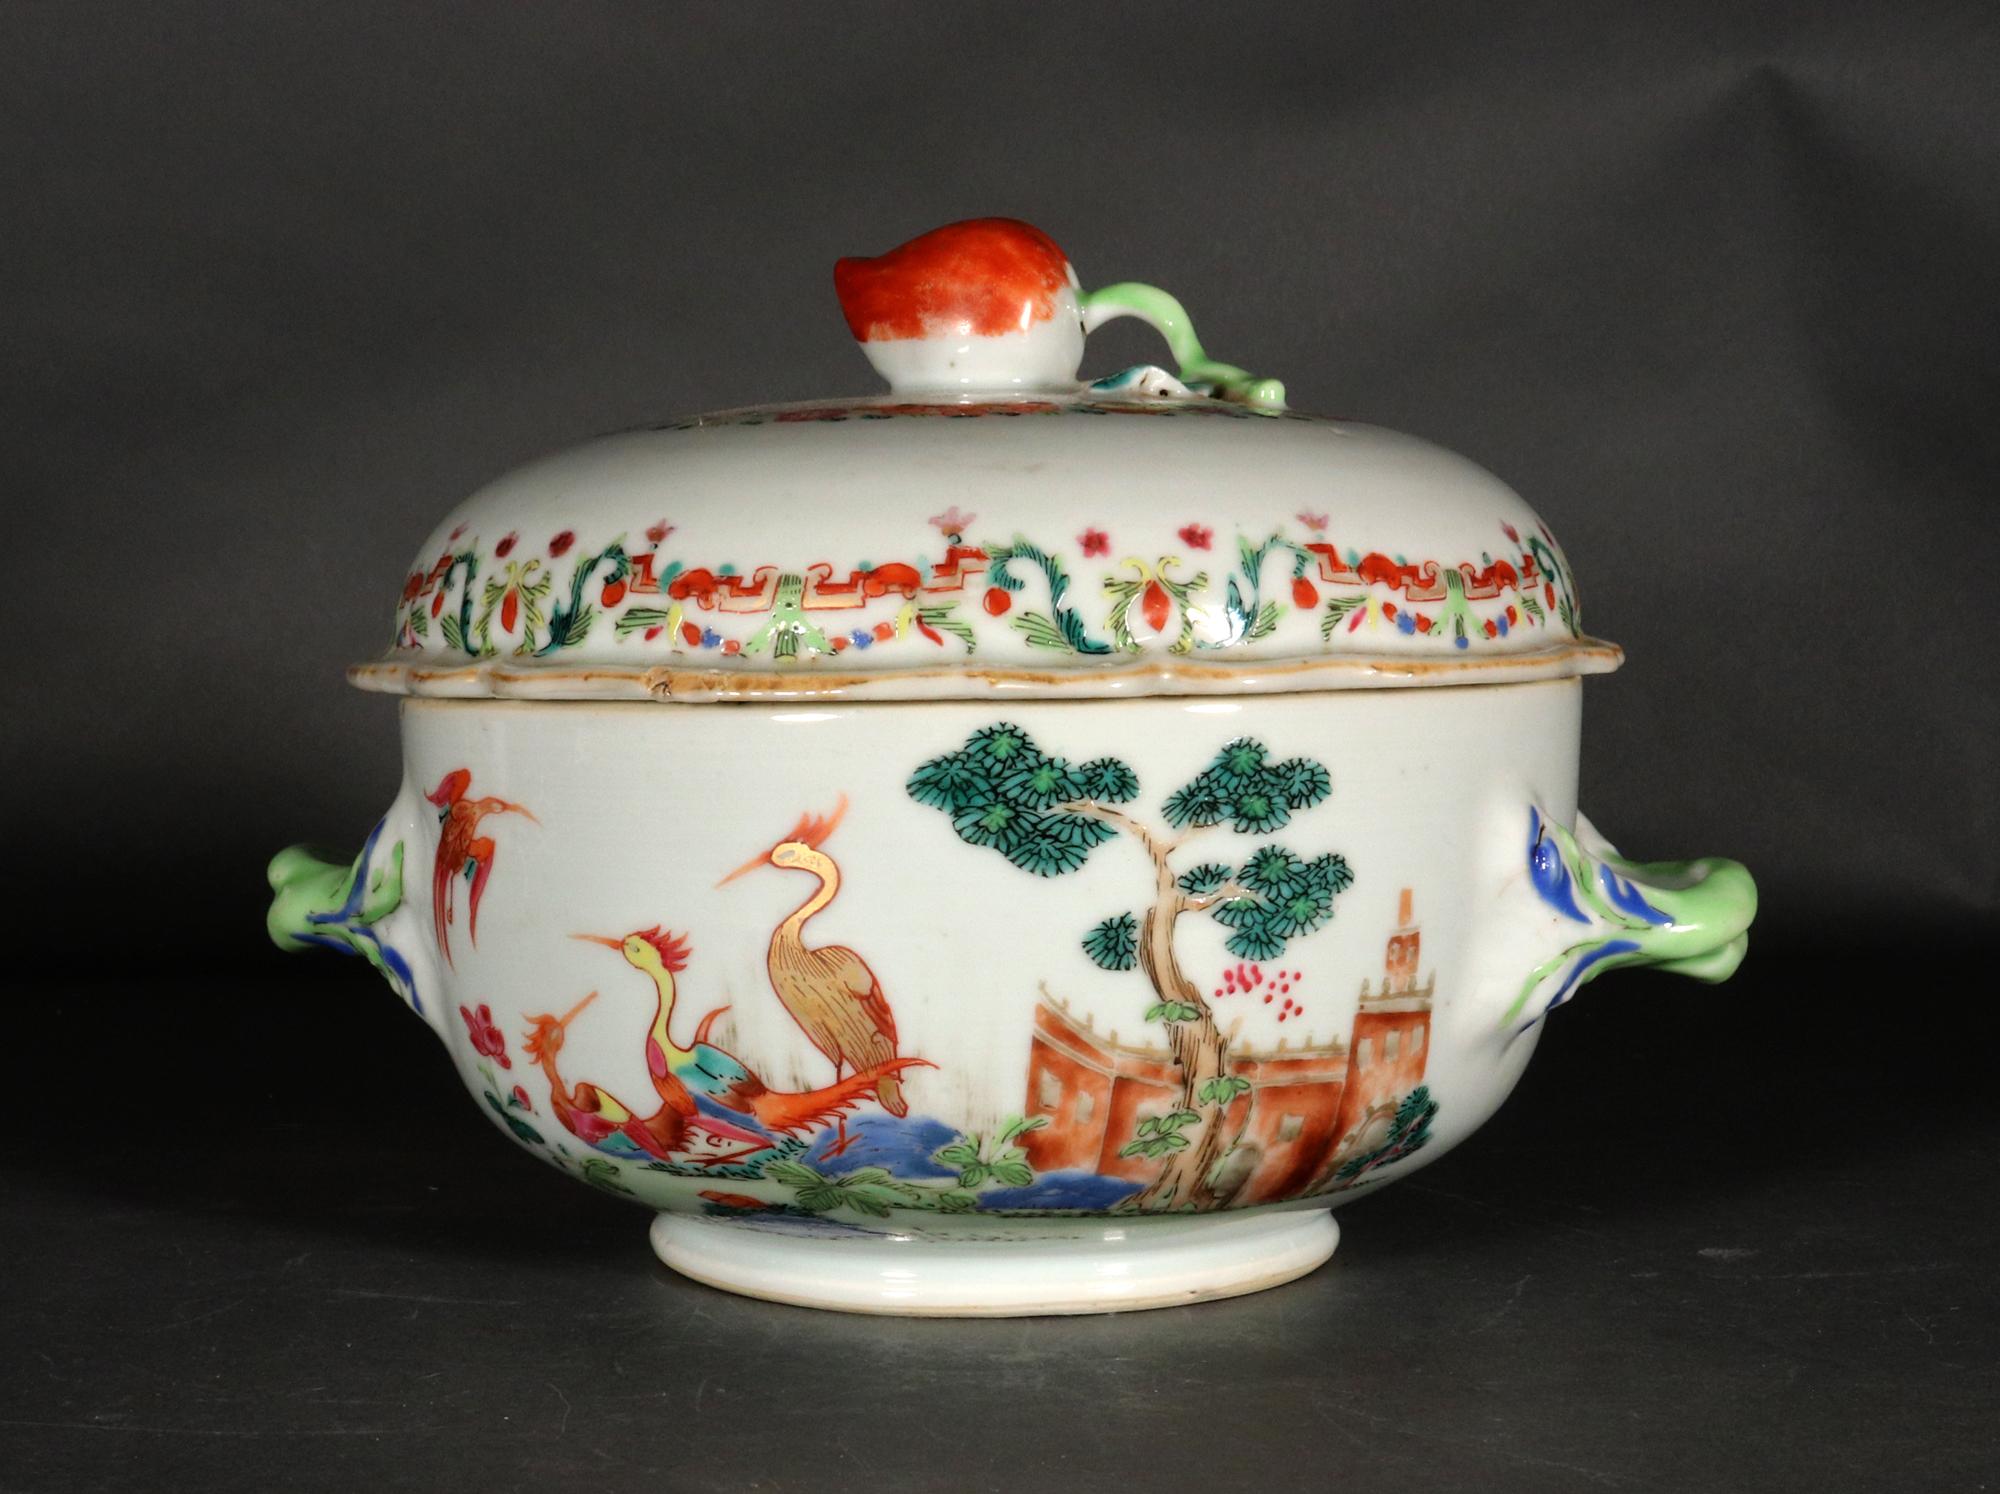 Chinese Export Famille Rose Circular Porcelain Tureen and Cover Painted with Cranes & Harbor Scene,
Circa 1745

The Chinese Export Famille Rose porcelain circular small tureen and cover is painted in a Meissen-style to front and back with a group of